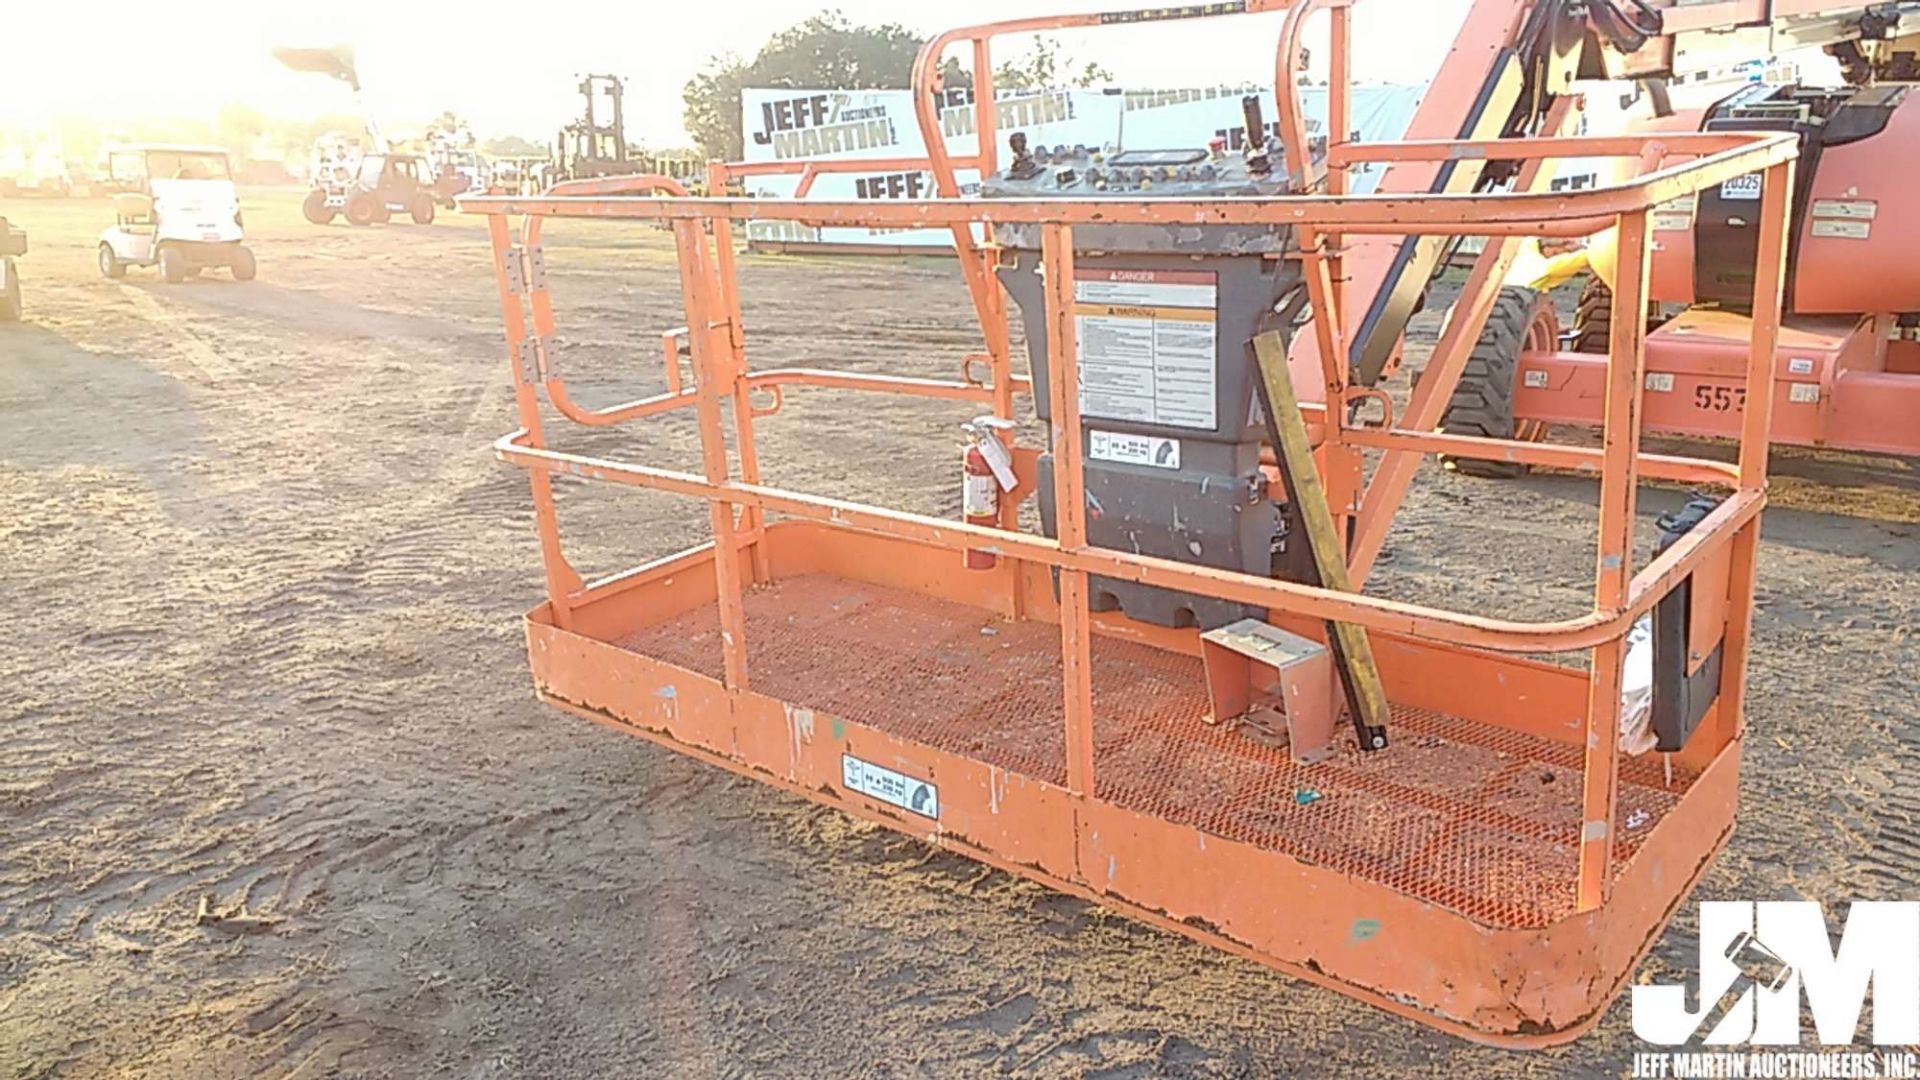 2013 JLG 600AJ 60' 4X4 ARTICULATED BOOM LIFT SN: 0300165579 - Image 9 of 27